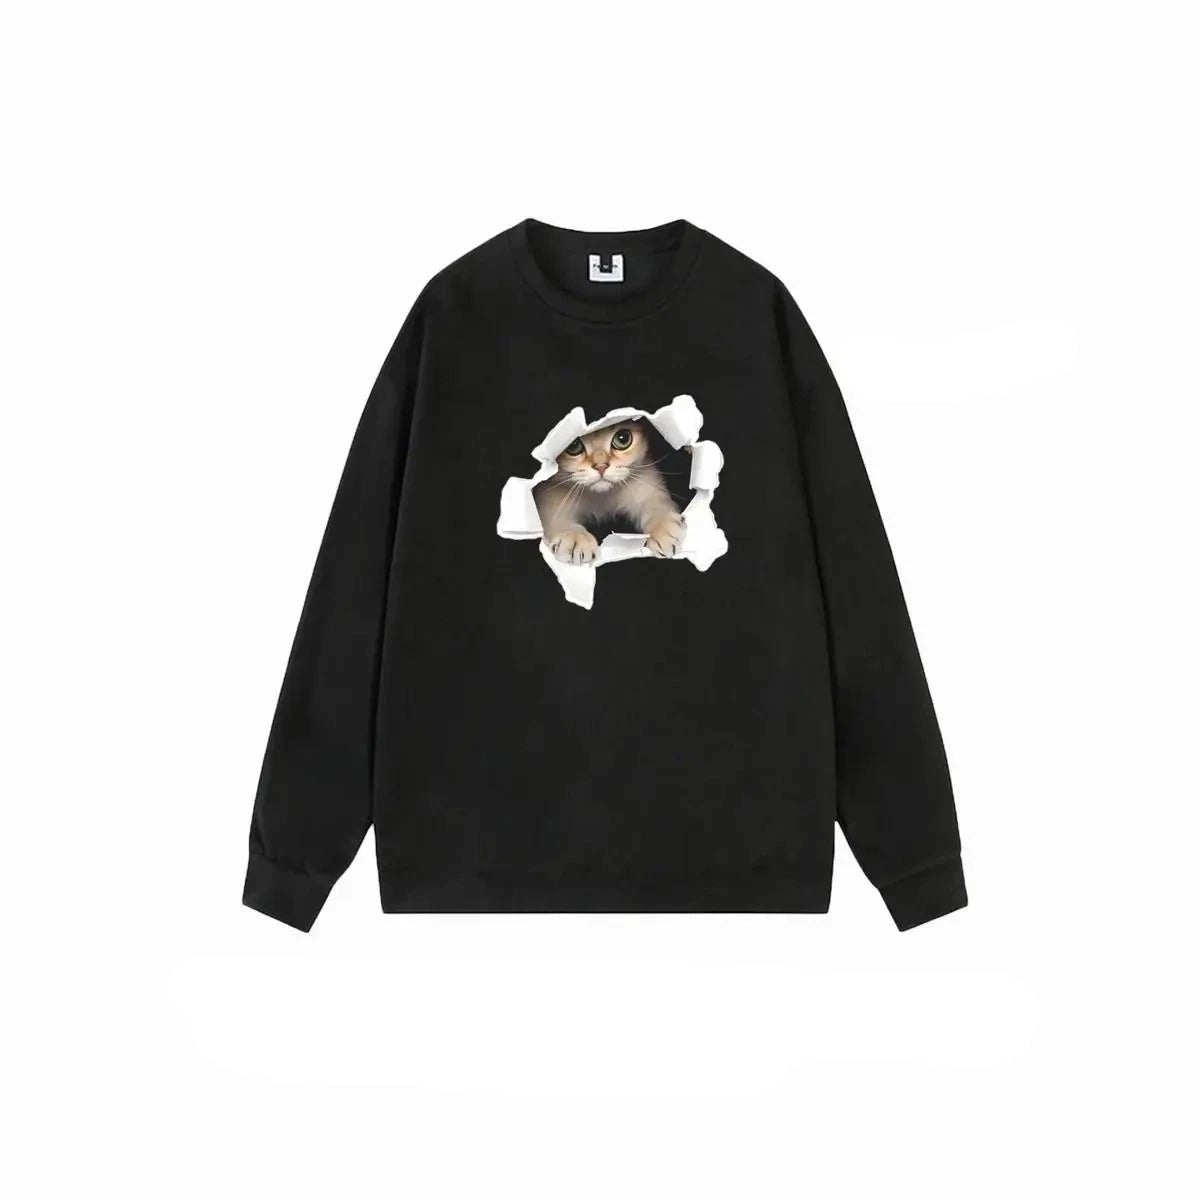 Adorable Cat Face Sweatshirt in Luxurious Suede Fabric